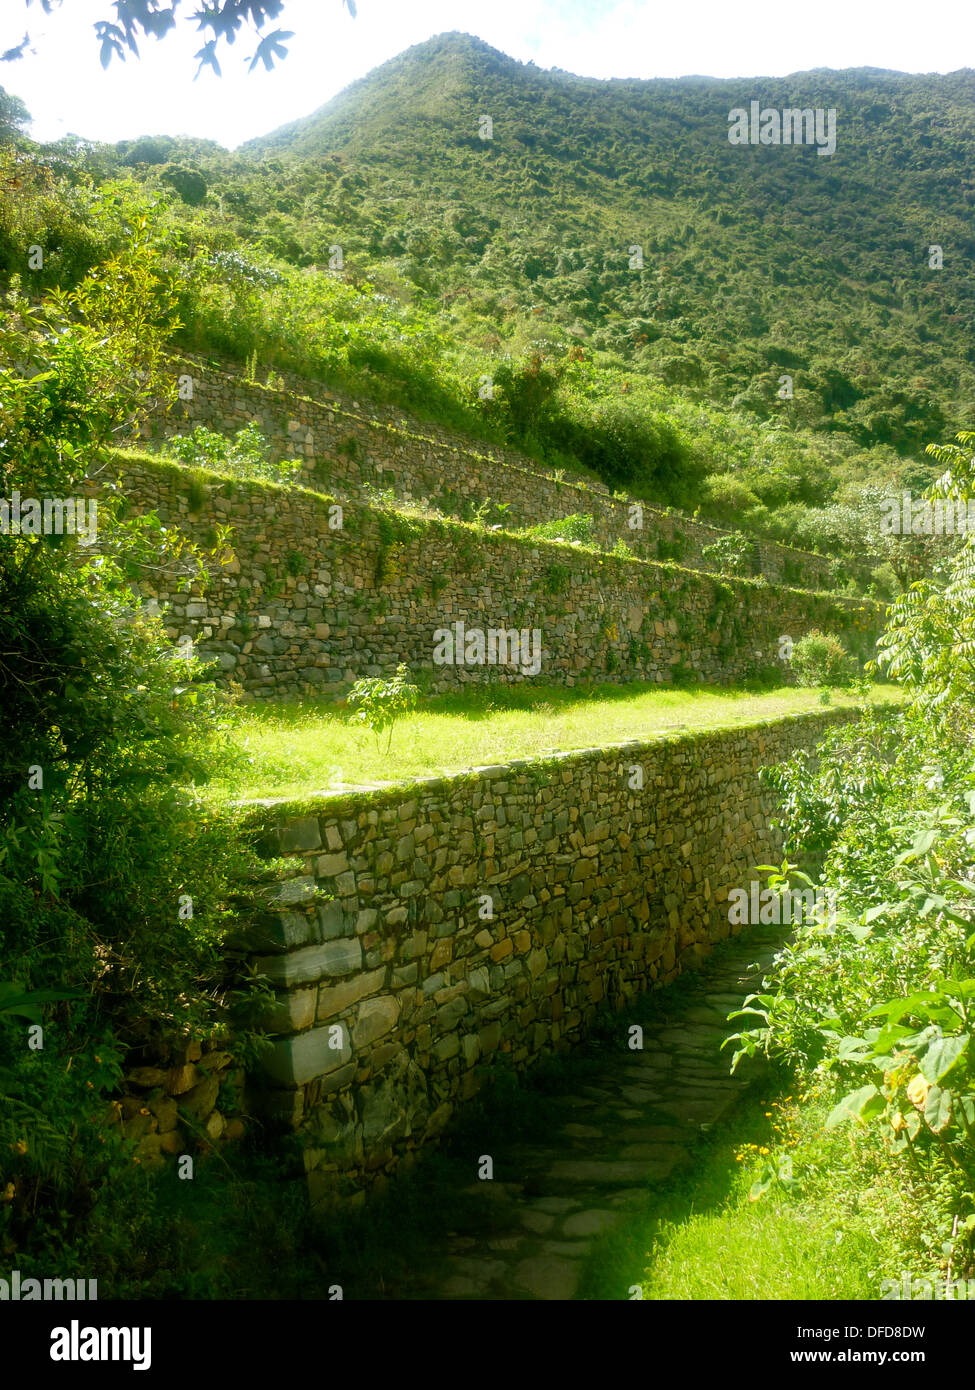 Stone terraces with llama detailing at the Inca site of Choquequirao, in the Apurimac valley, Cuzco, Peru Stock Photo